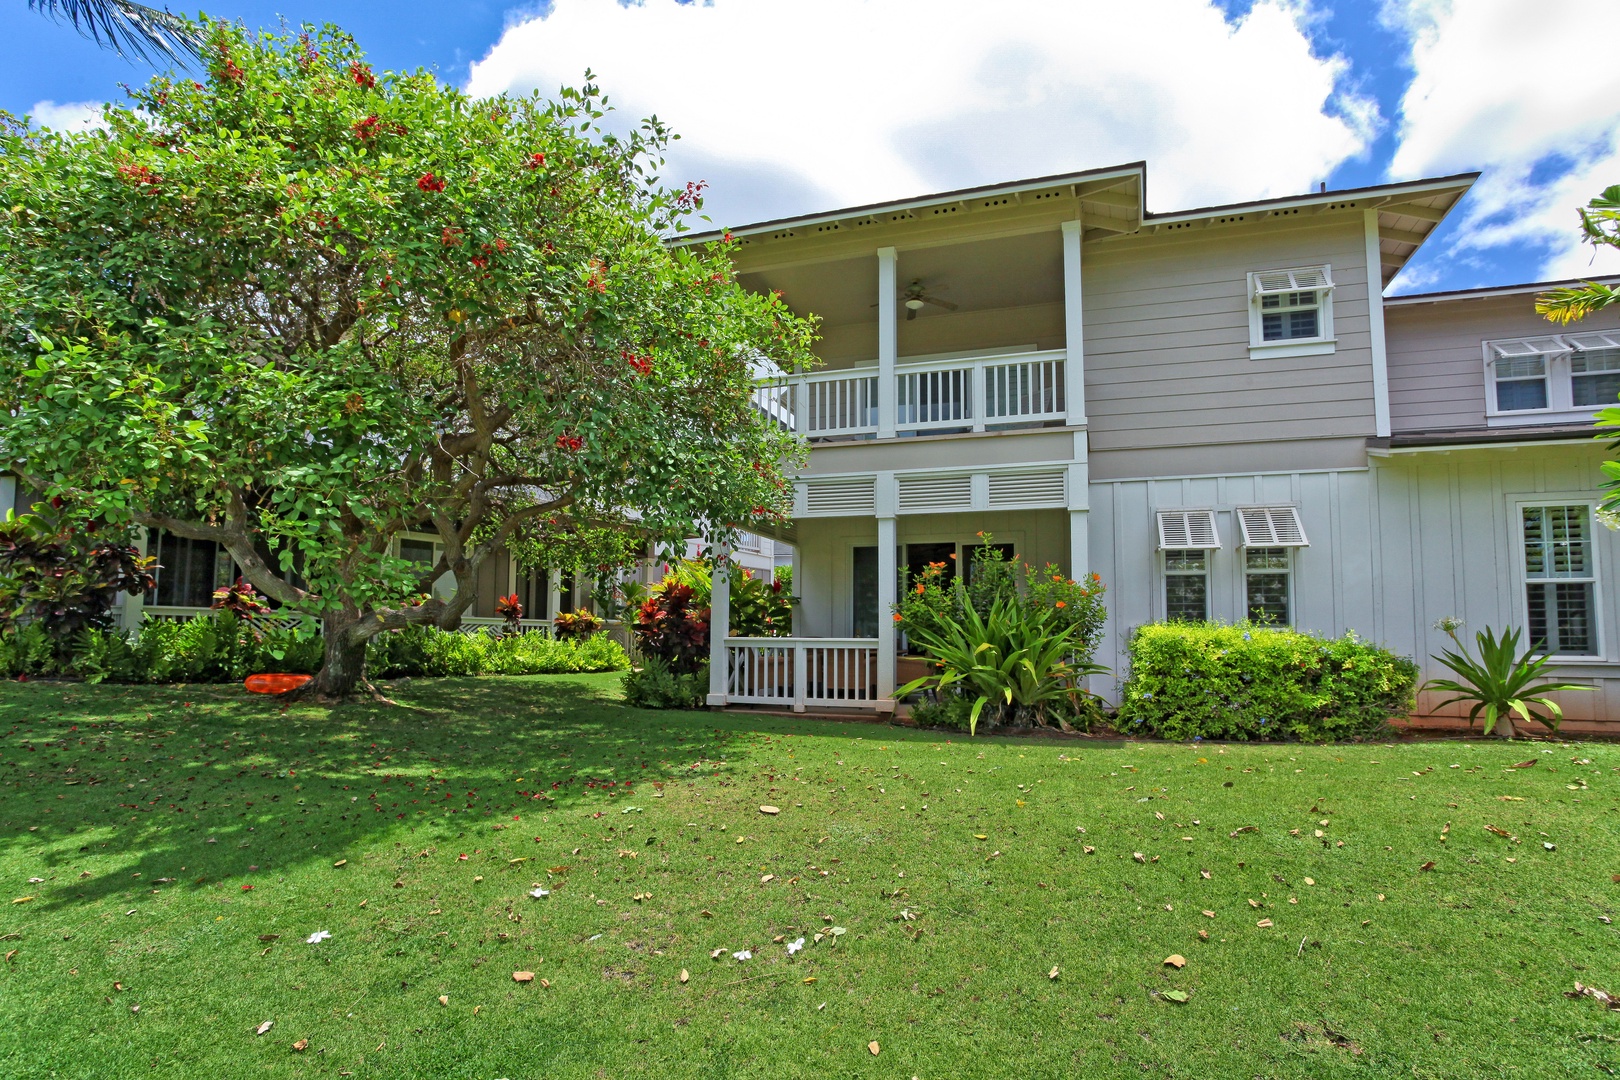 Kapolei Vacation Rentals, Coconut Plantation 1174-2 - The expansive manicured lawn at the rear of the home.